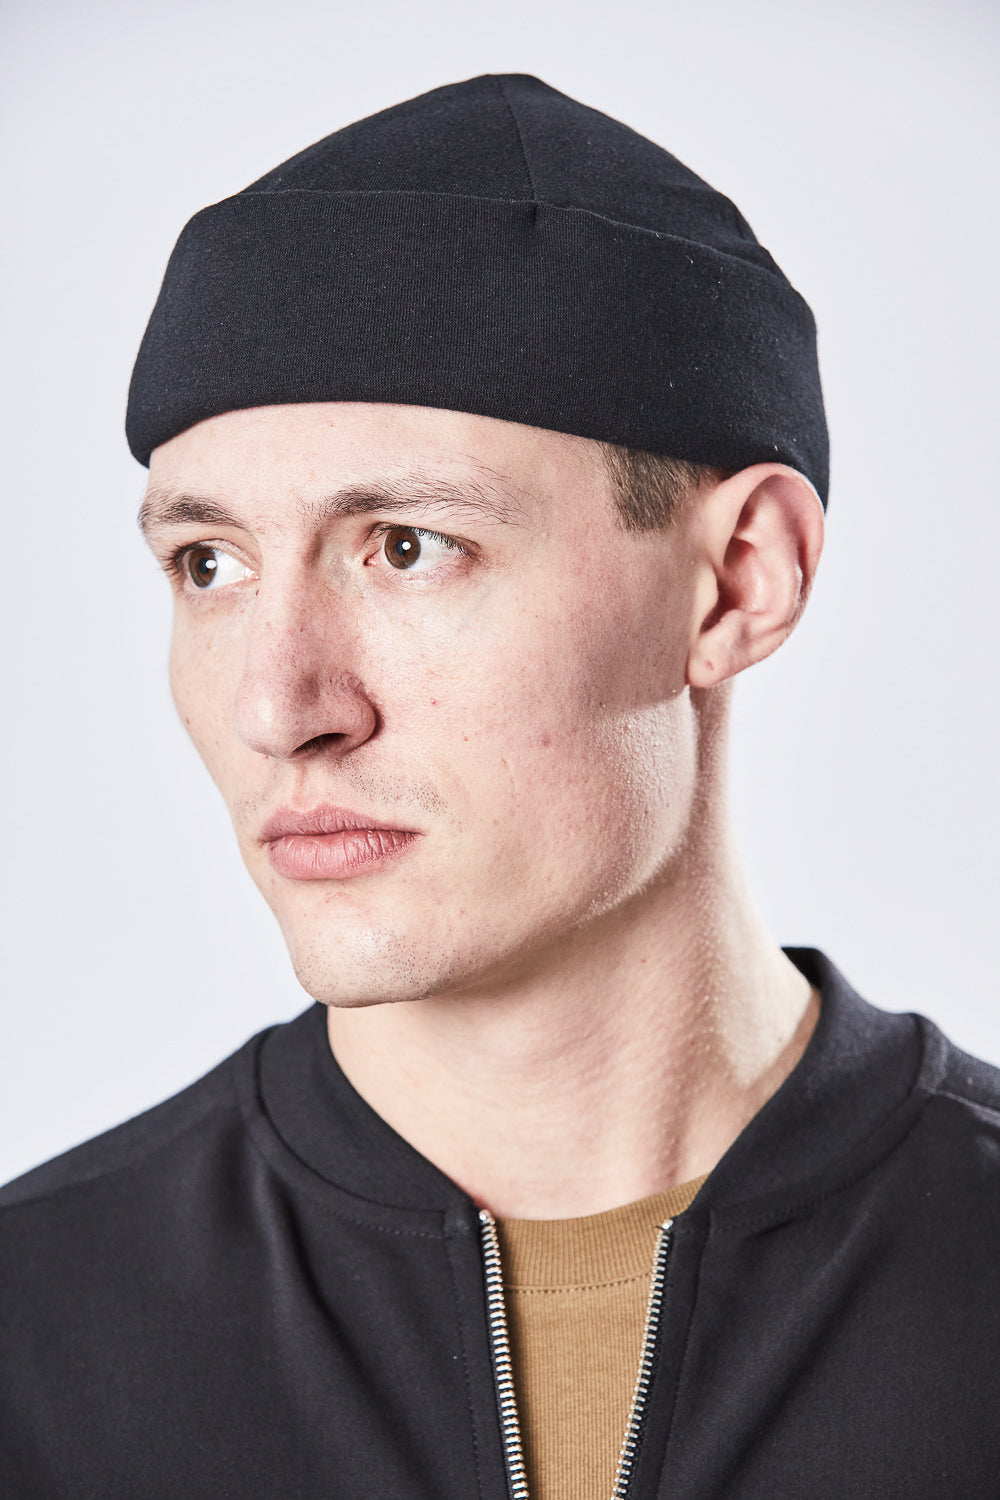 Buy the Thom Krom Cap 55 in Black at Intro. Spend £50 for free UK delivery. Official stockists. We ship worldwide.